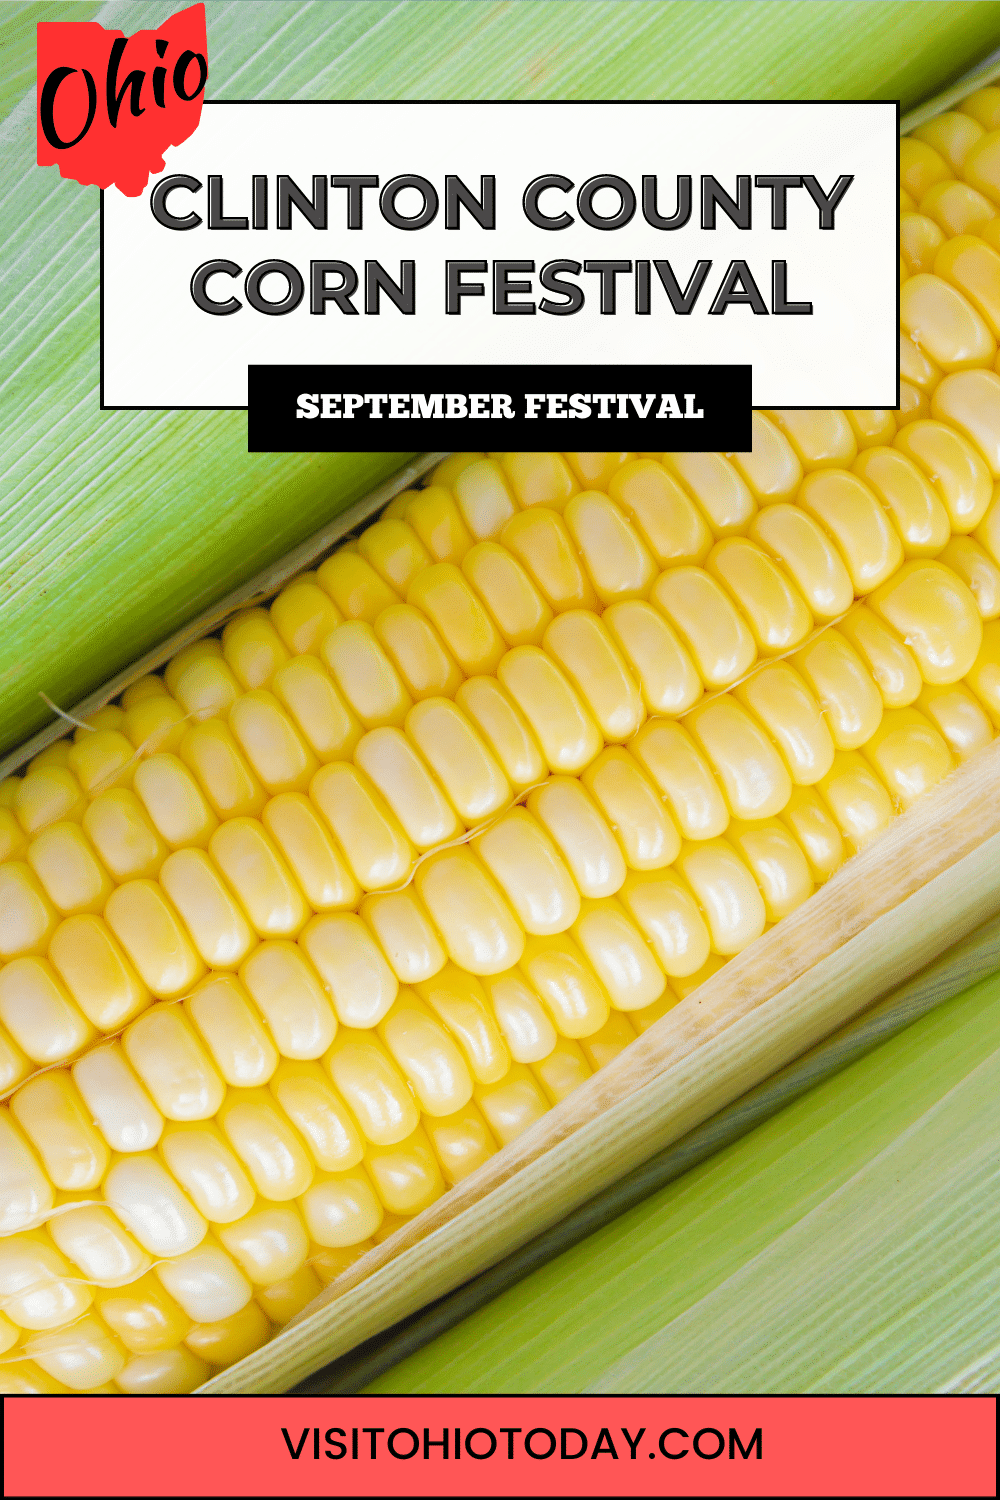 The Clinton County Corn Festival is an annual three-day event that takes place during the first weekend following Labor Day and is organized by The Antique Power Club of Clinton County.